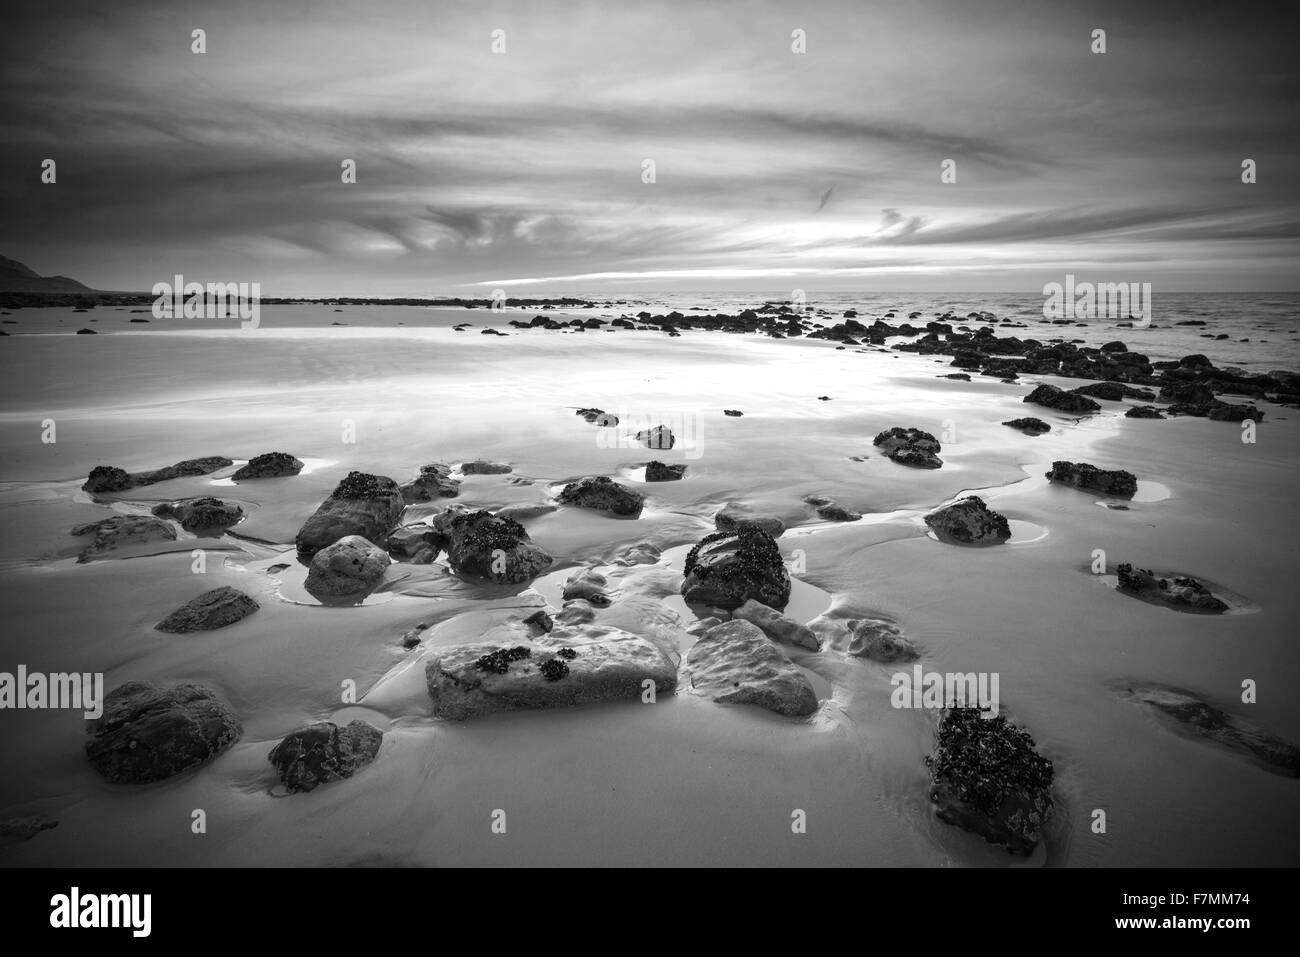 Sunrise landscape on rocky sandy beach with vibrant sky and clouds in black and white Stock Photo